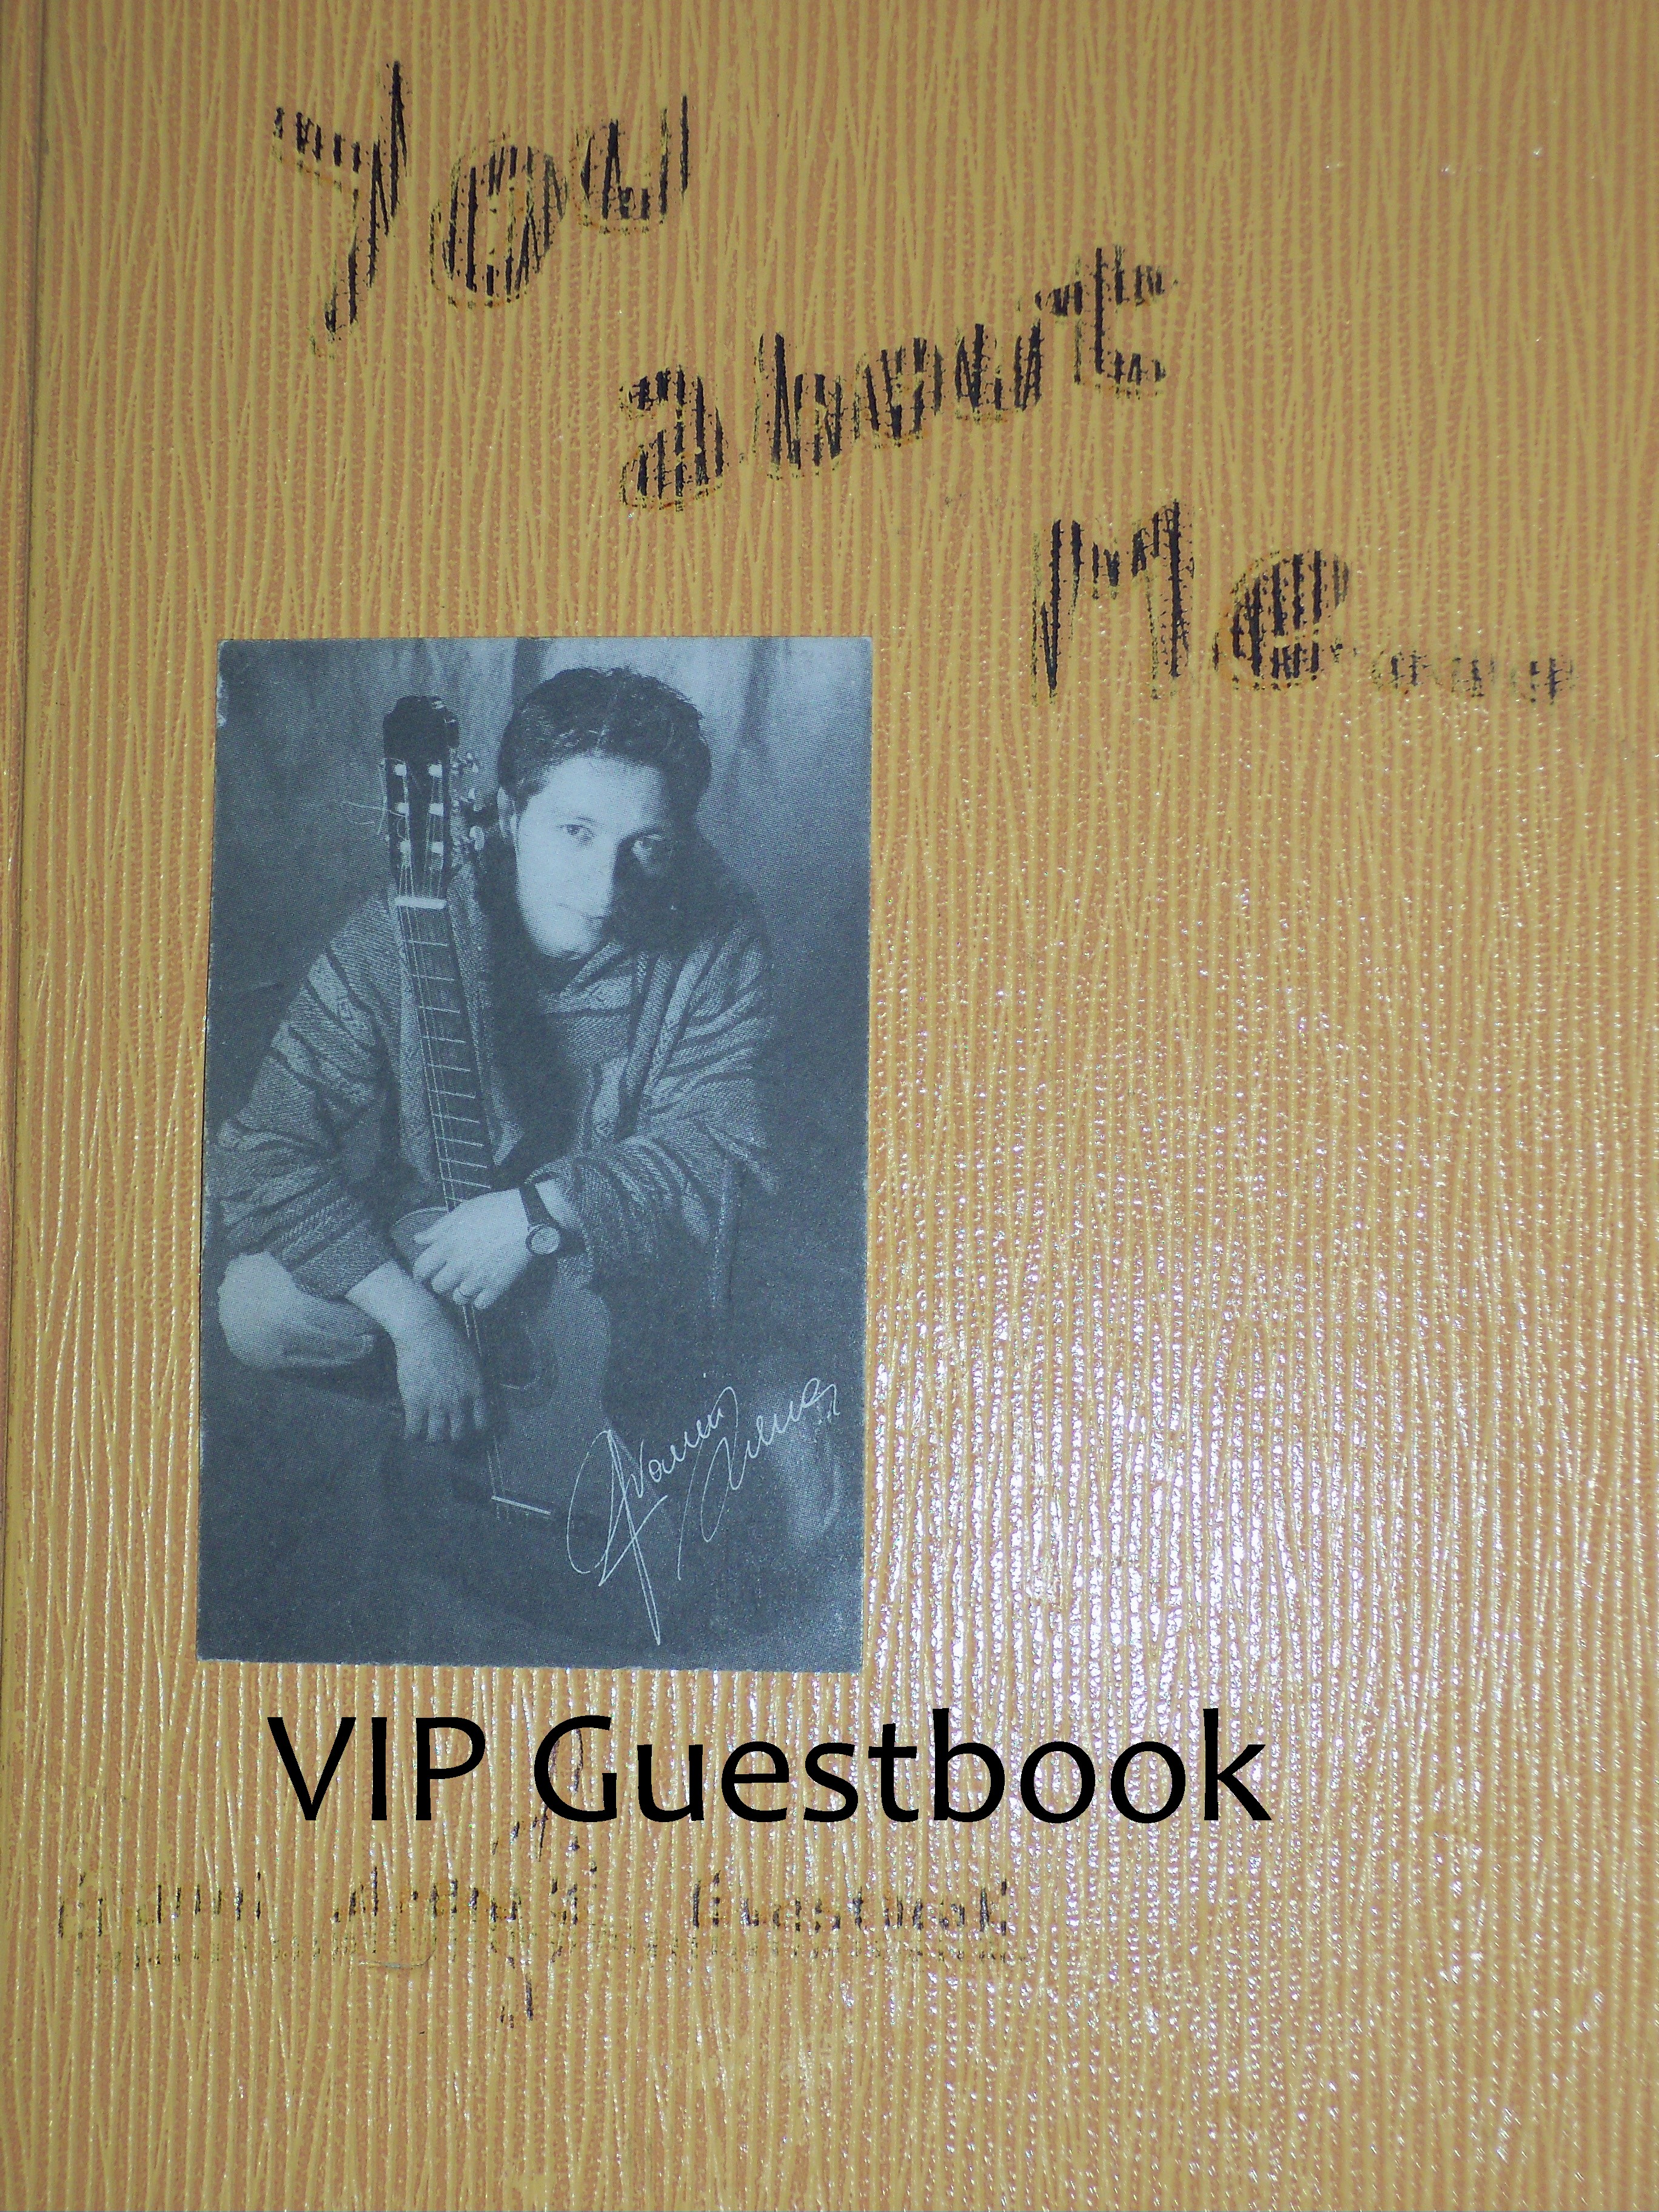 VIP Guestbook